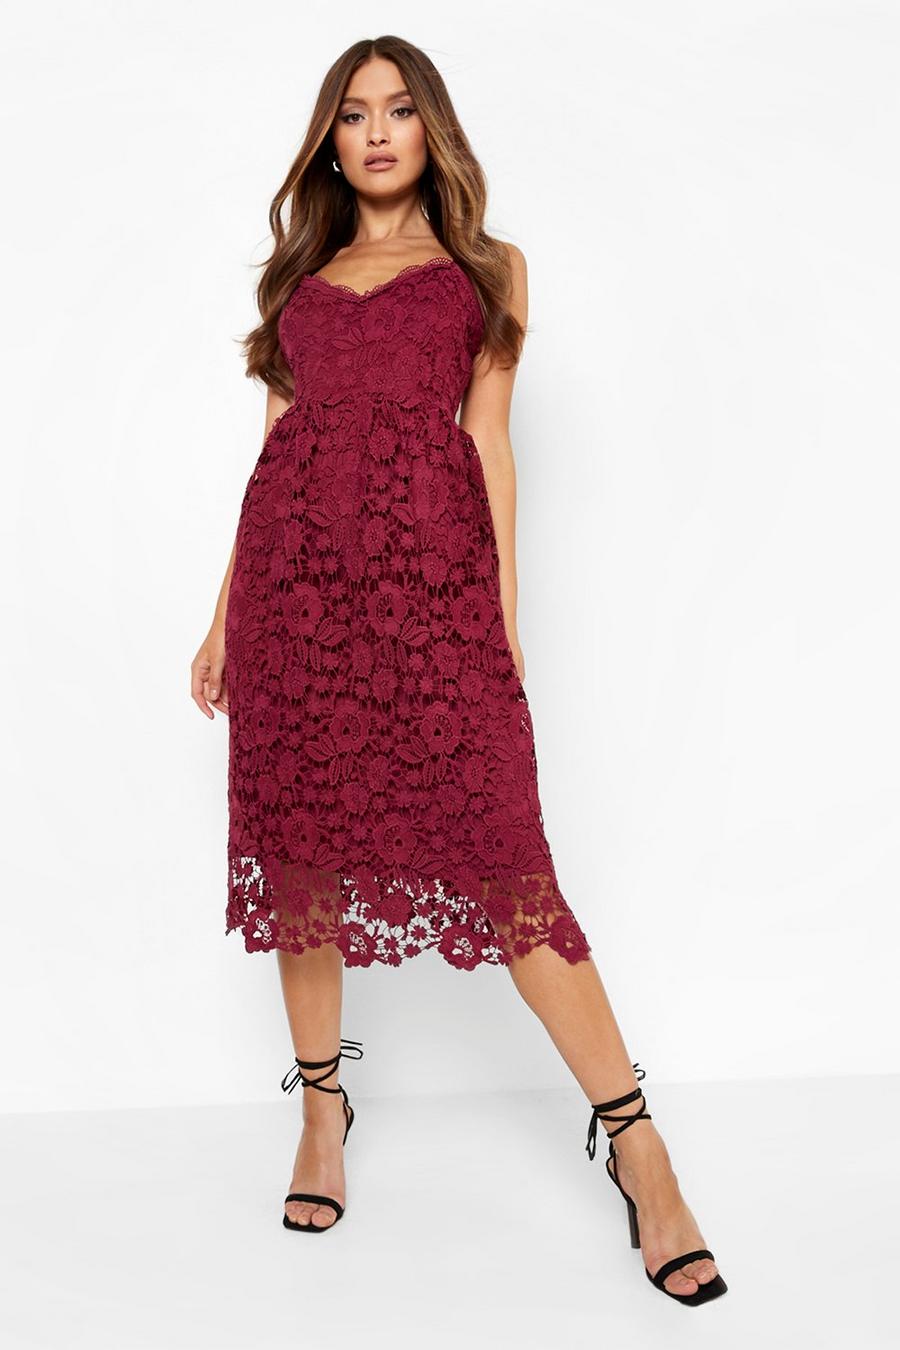 Berry red Strappy Crochet Lace Skater Midi Dress